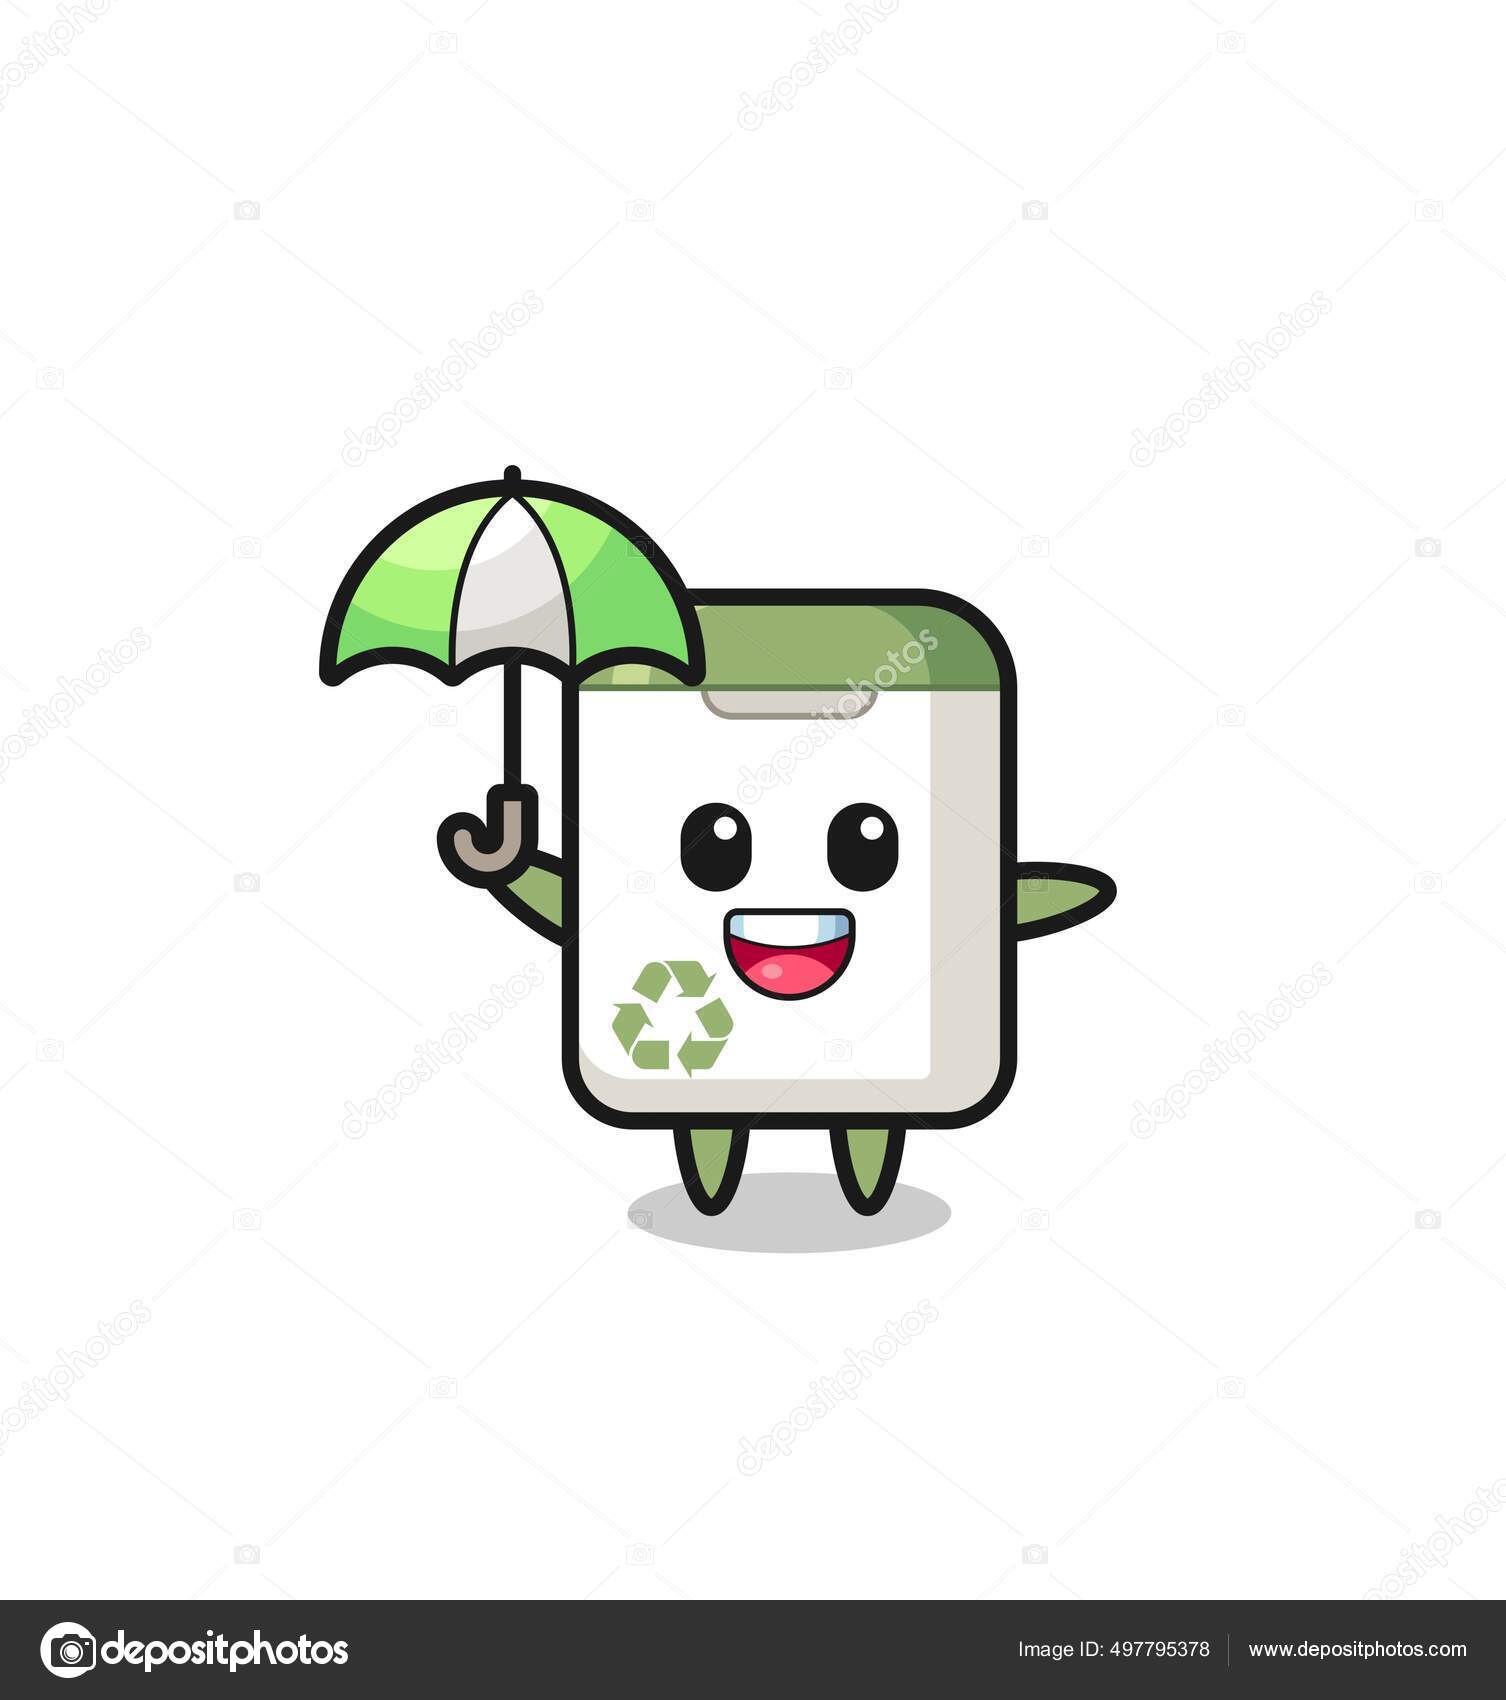 Trash Can Mascot With Thumbs Up Stock Illustration - Download